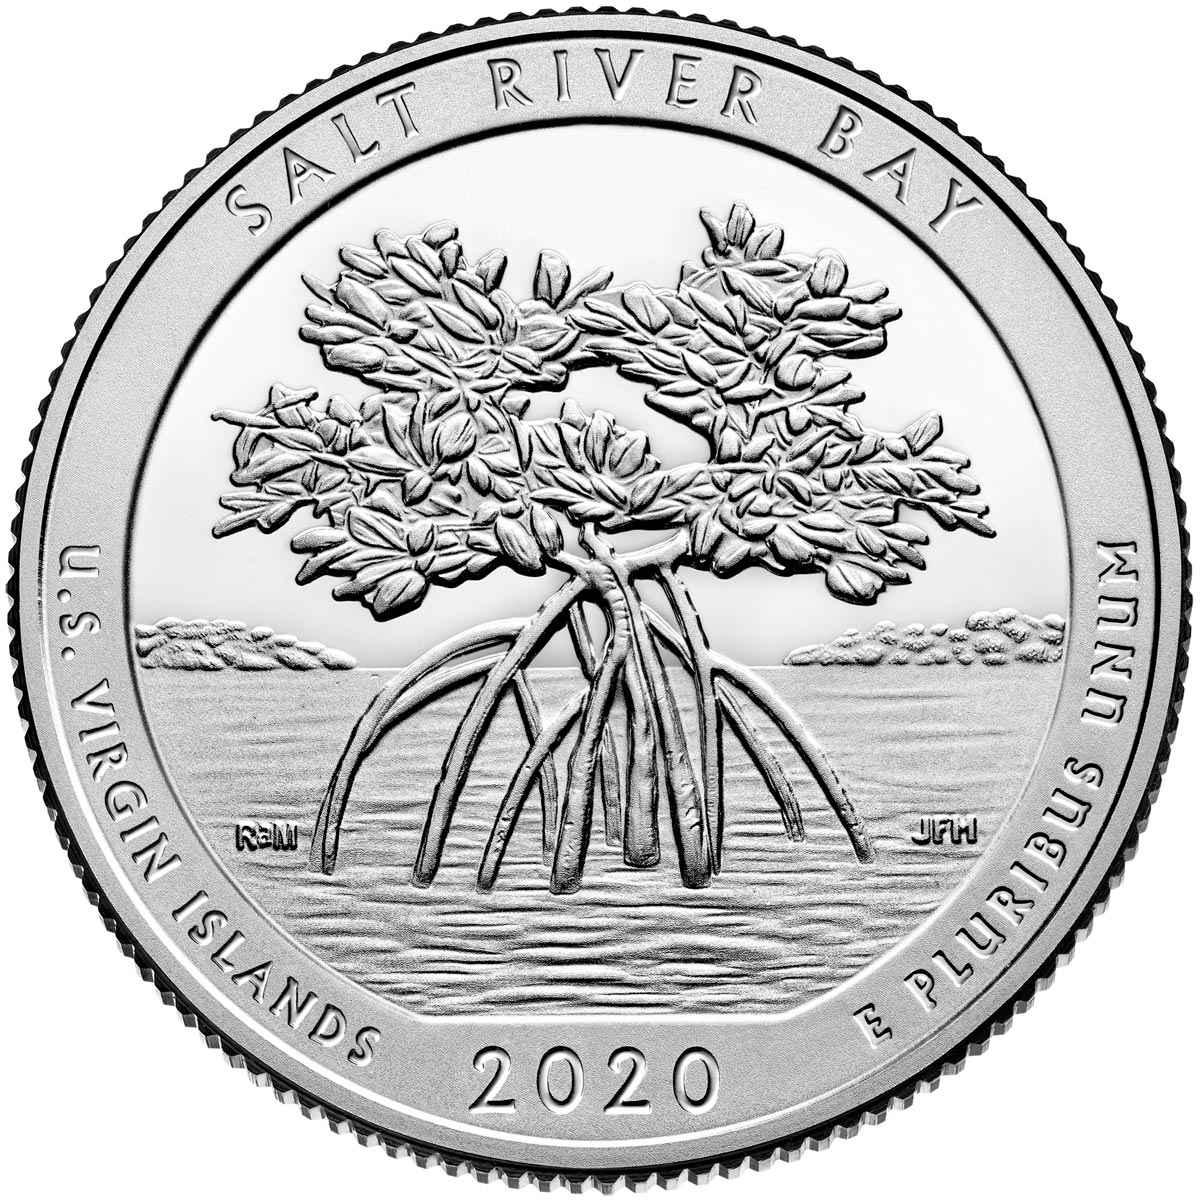 Image of 25 cents coin - Salt River Bay National Historical Park and Ecological Preserve | USA 2020.  The Copper–Nickel (CuNi) coin is of Proof, BU, UNC quality.